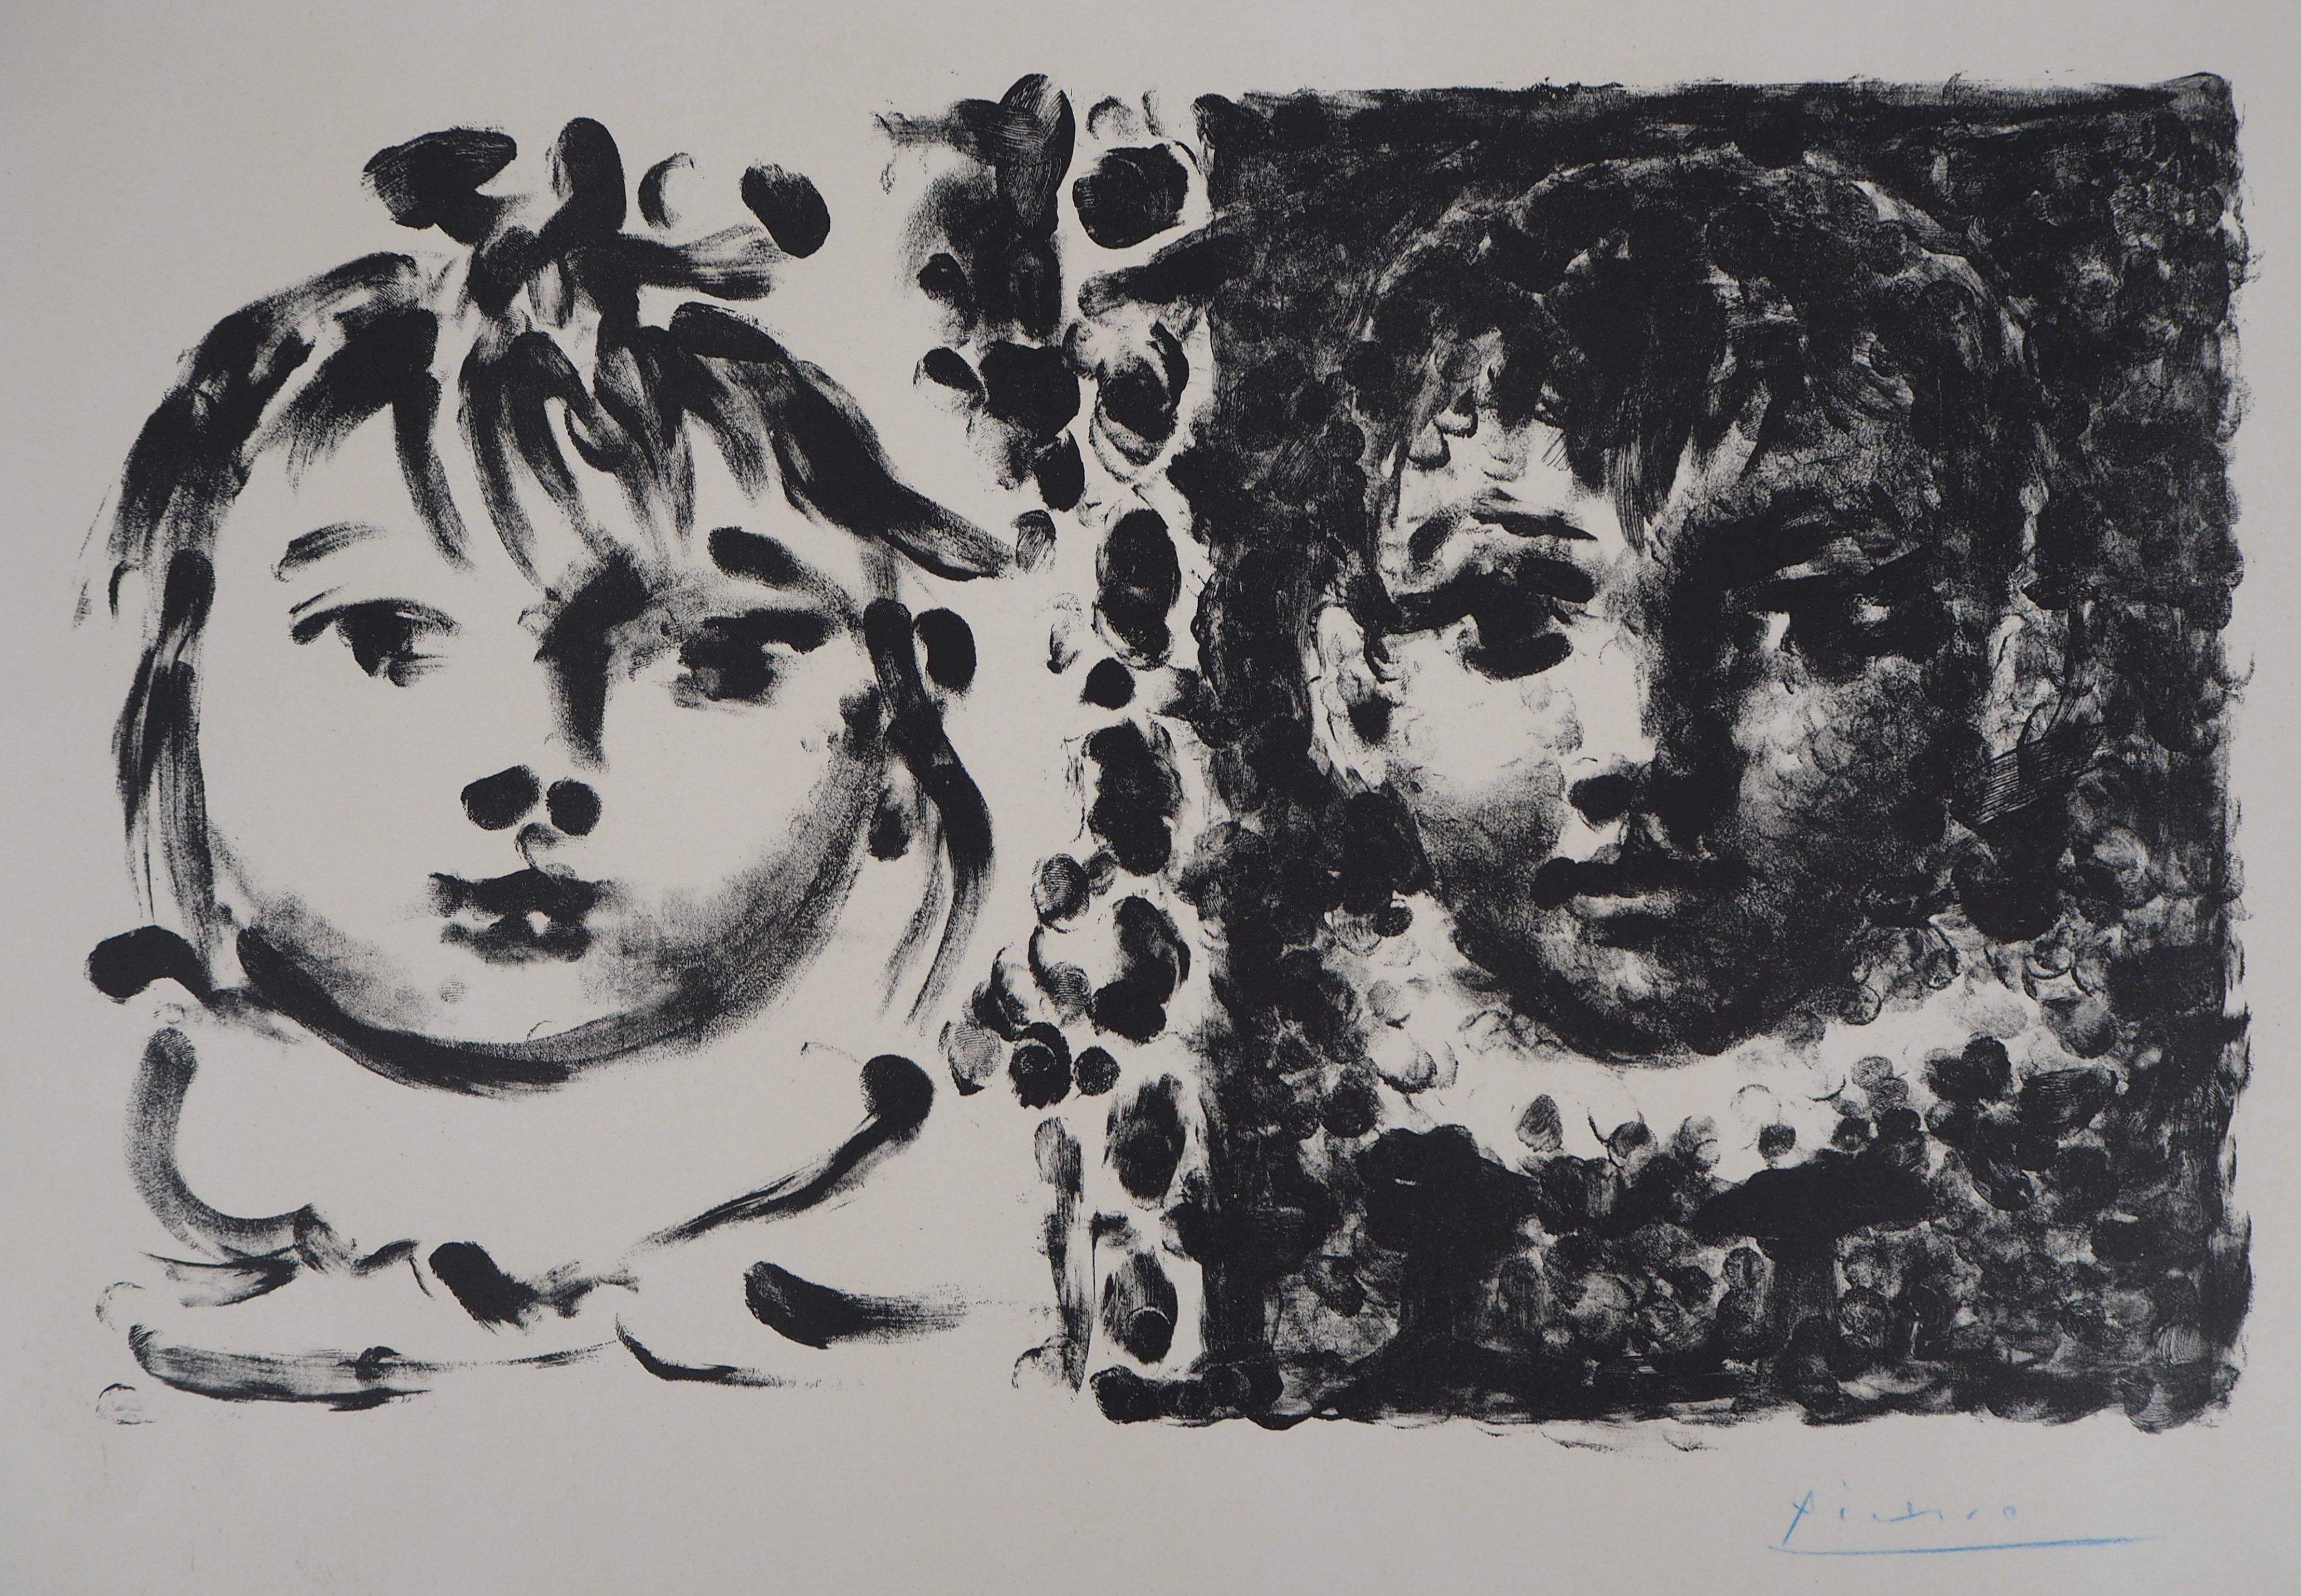 Children : Claude and Paloma - Original lithograph, Handsigned (Bloch #664) - Print by Pablo Picasso